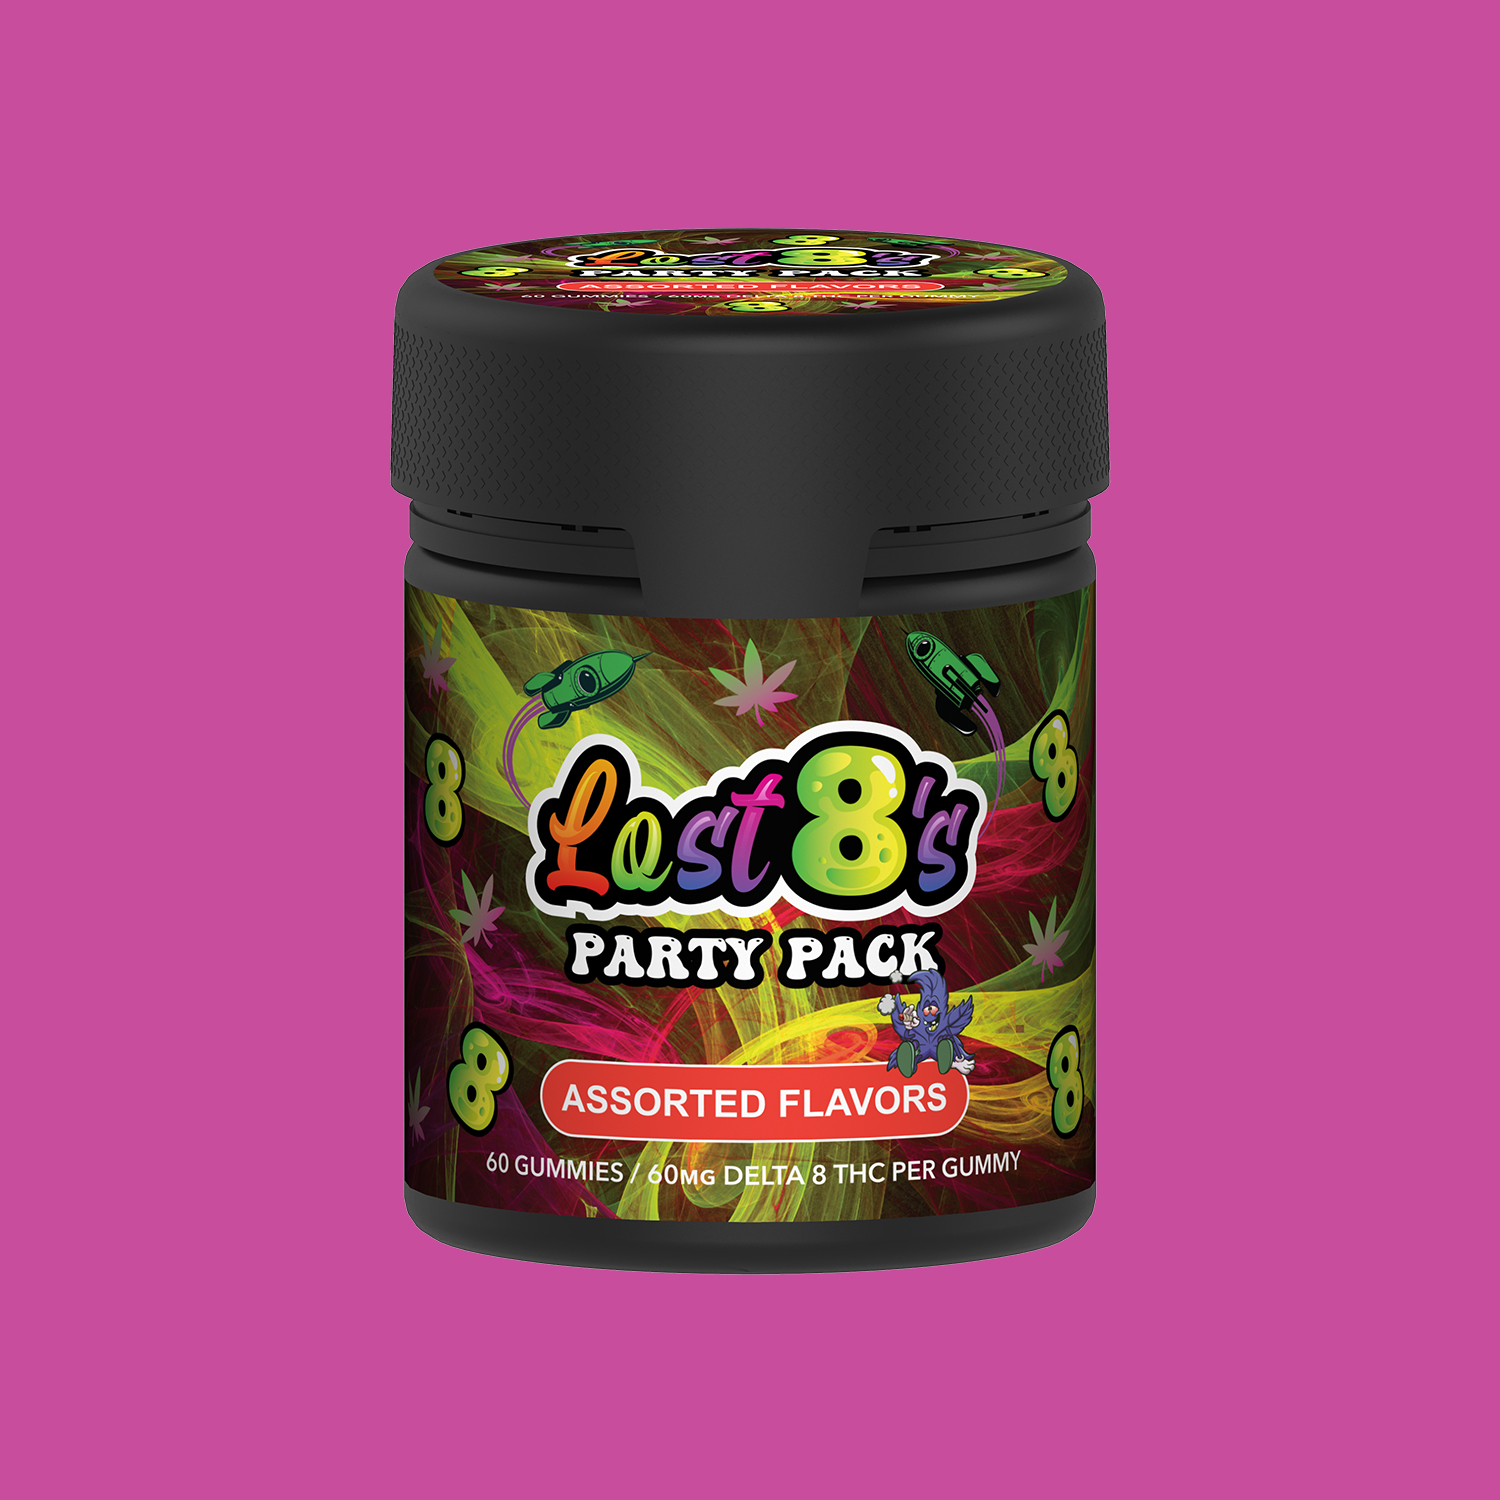 Lost 8's Delta 8 THC Gummies 3600mg Party Pack